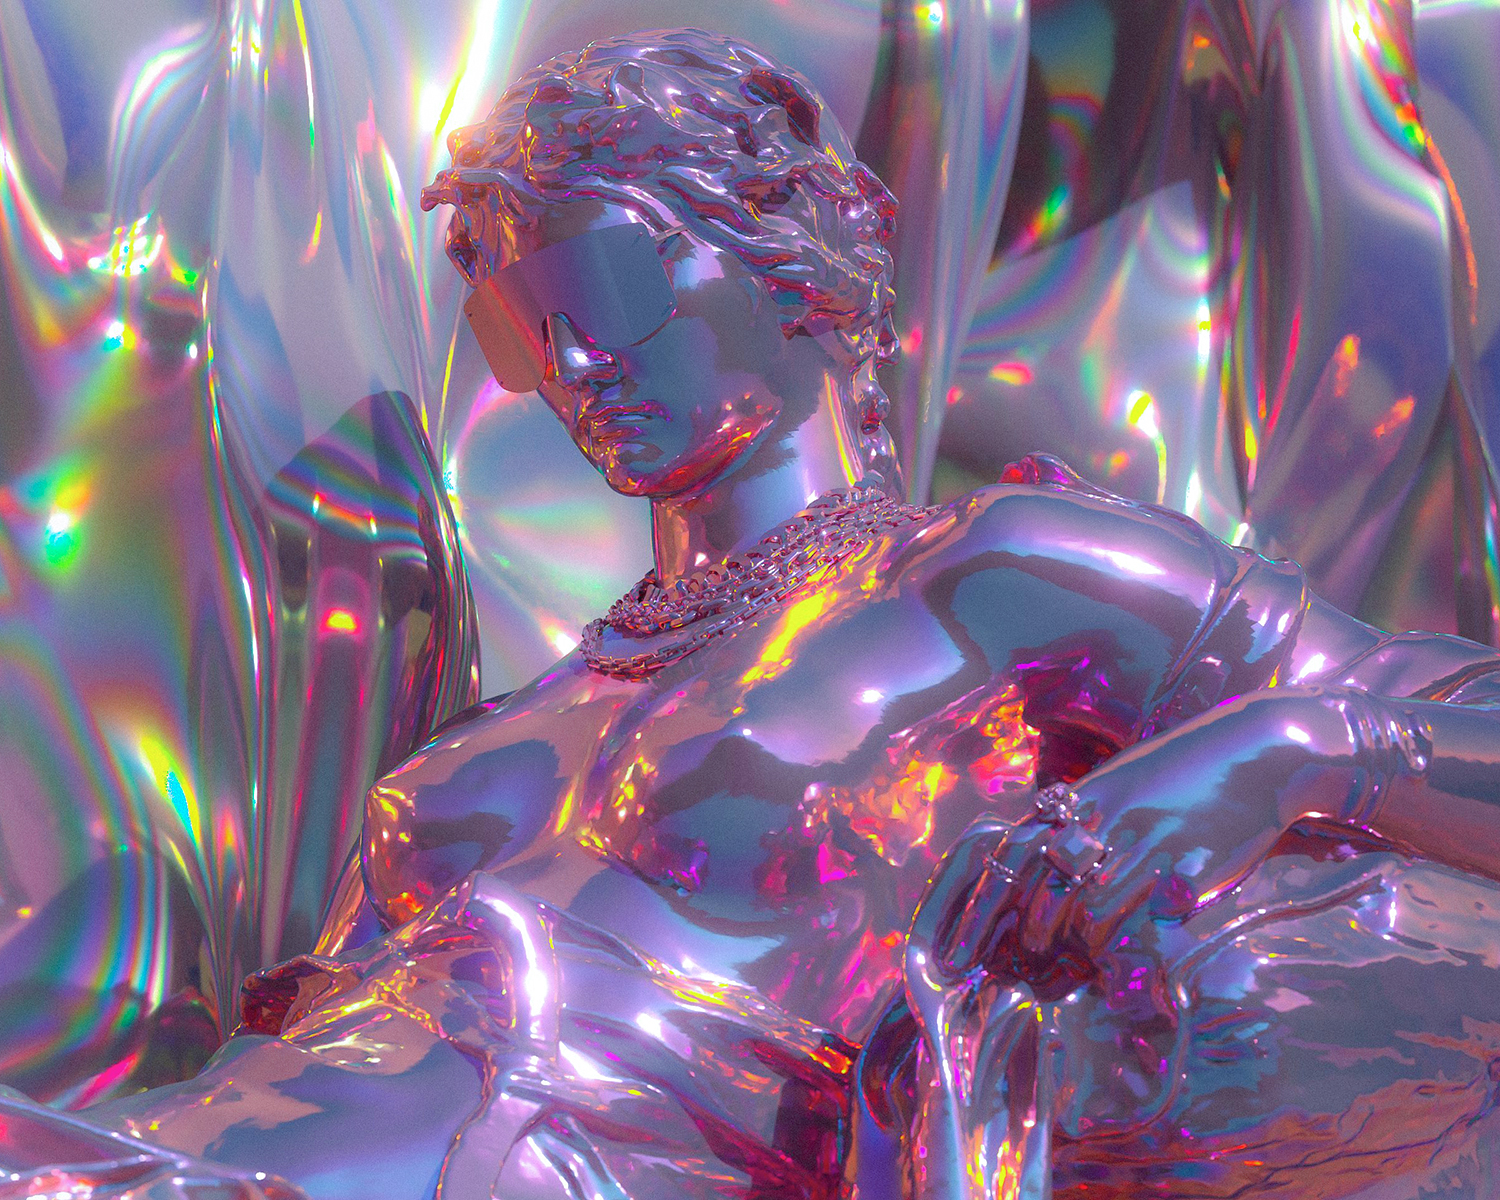 An image of a statue-like figure with a metallic surface reflecting a spectrum of colors, reminiscent of a hologram. The figure wears sunglasses and is adorned with a chain necklace, giving a modern, stylish twist to a classic sculpture form.